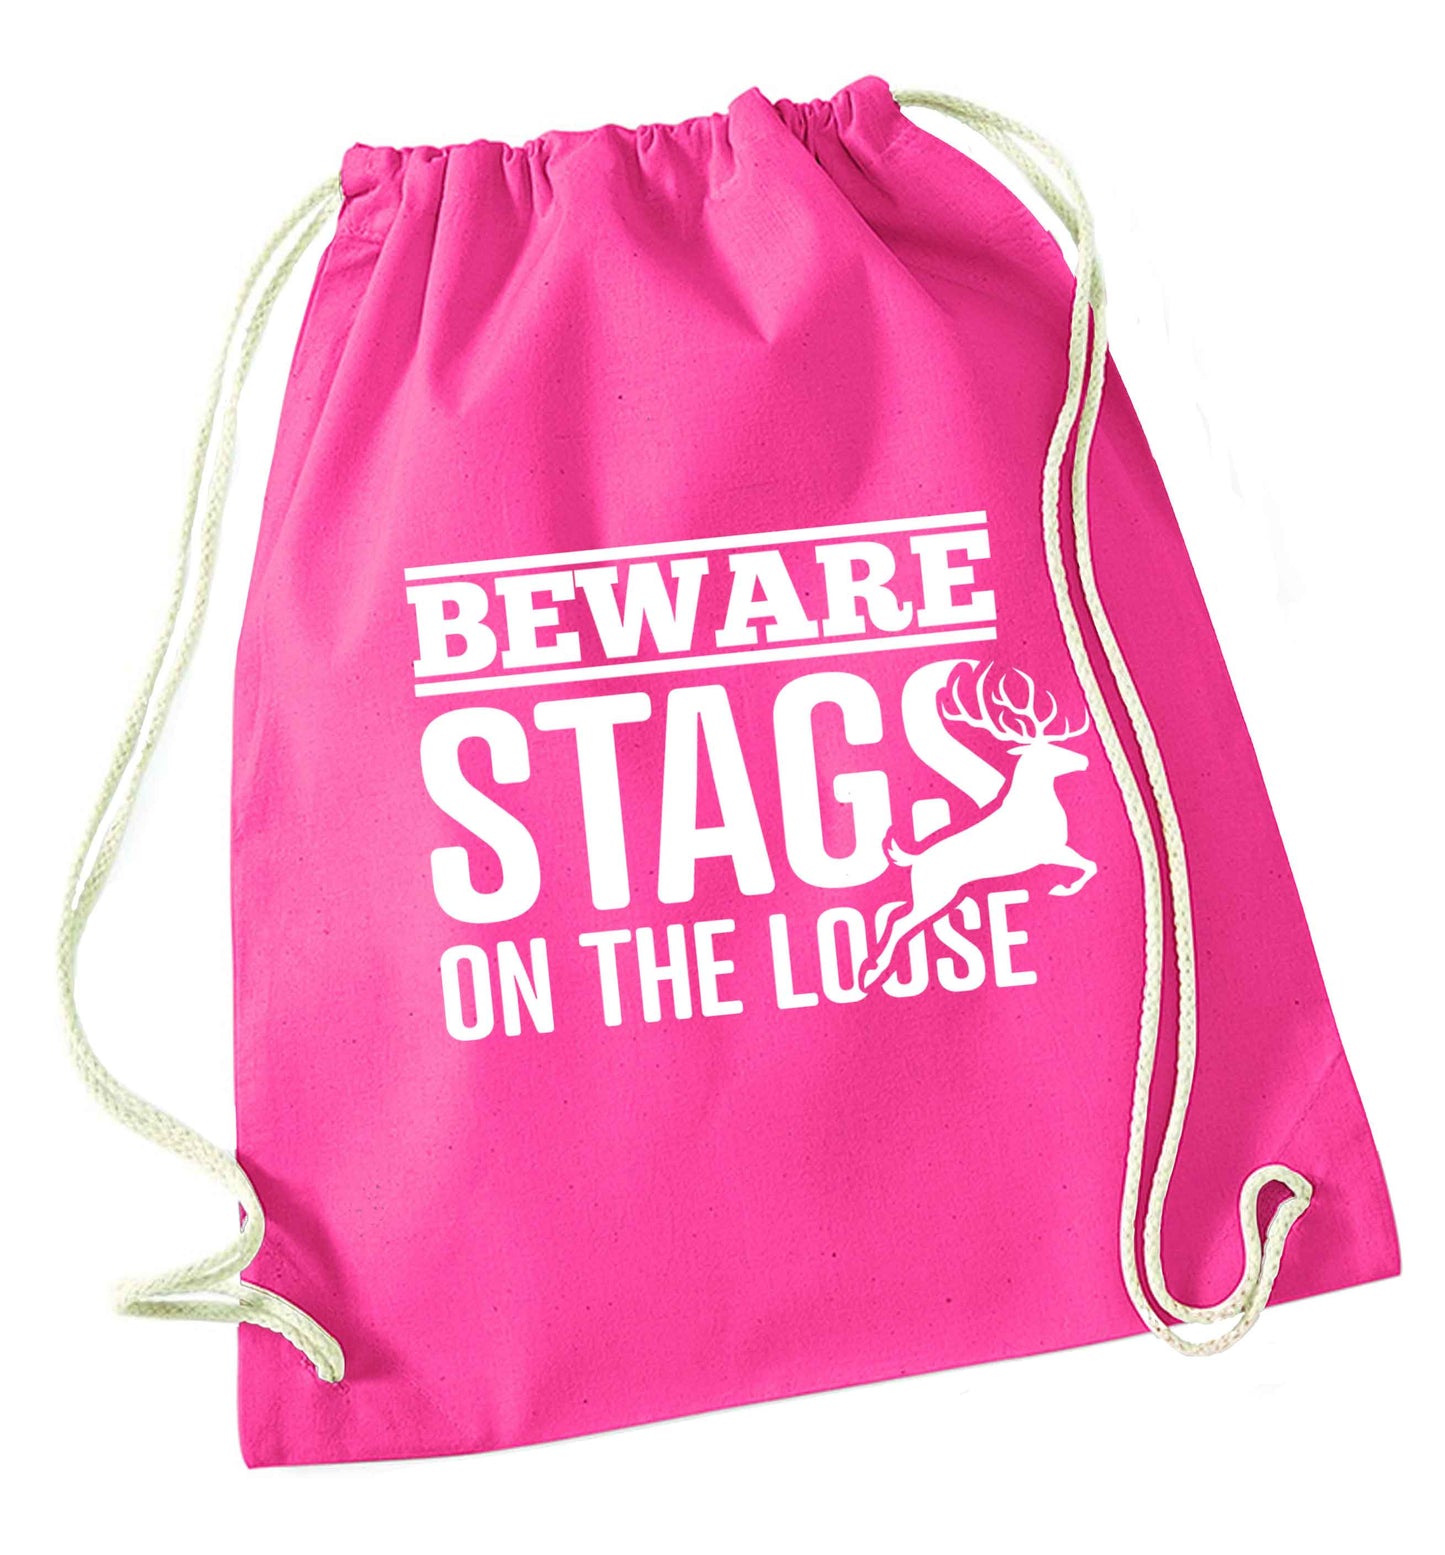 Beware stags on the loose pink drawstring bag